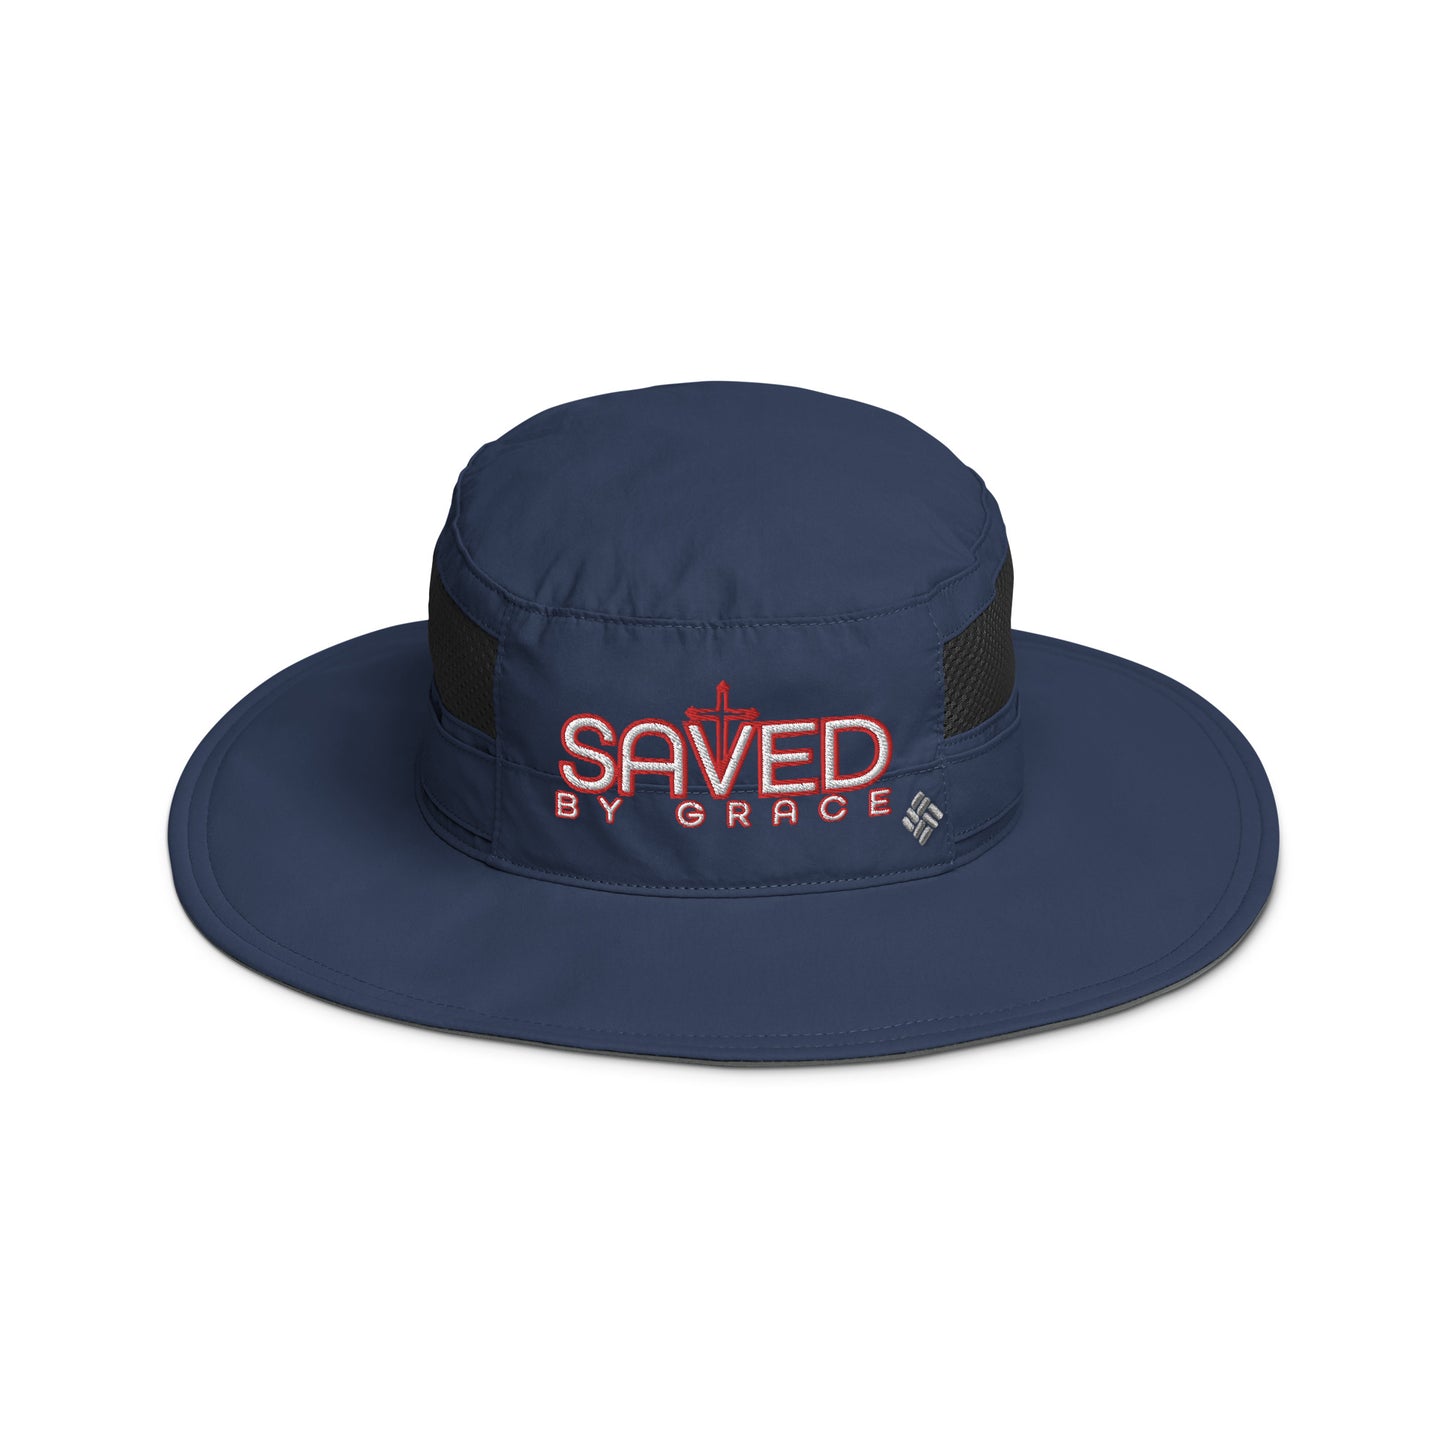 SAVED BY GRACE- Columbia booney hat